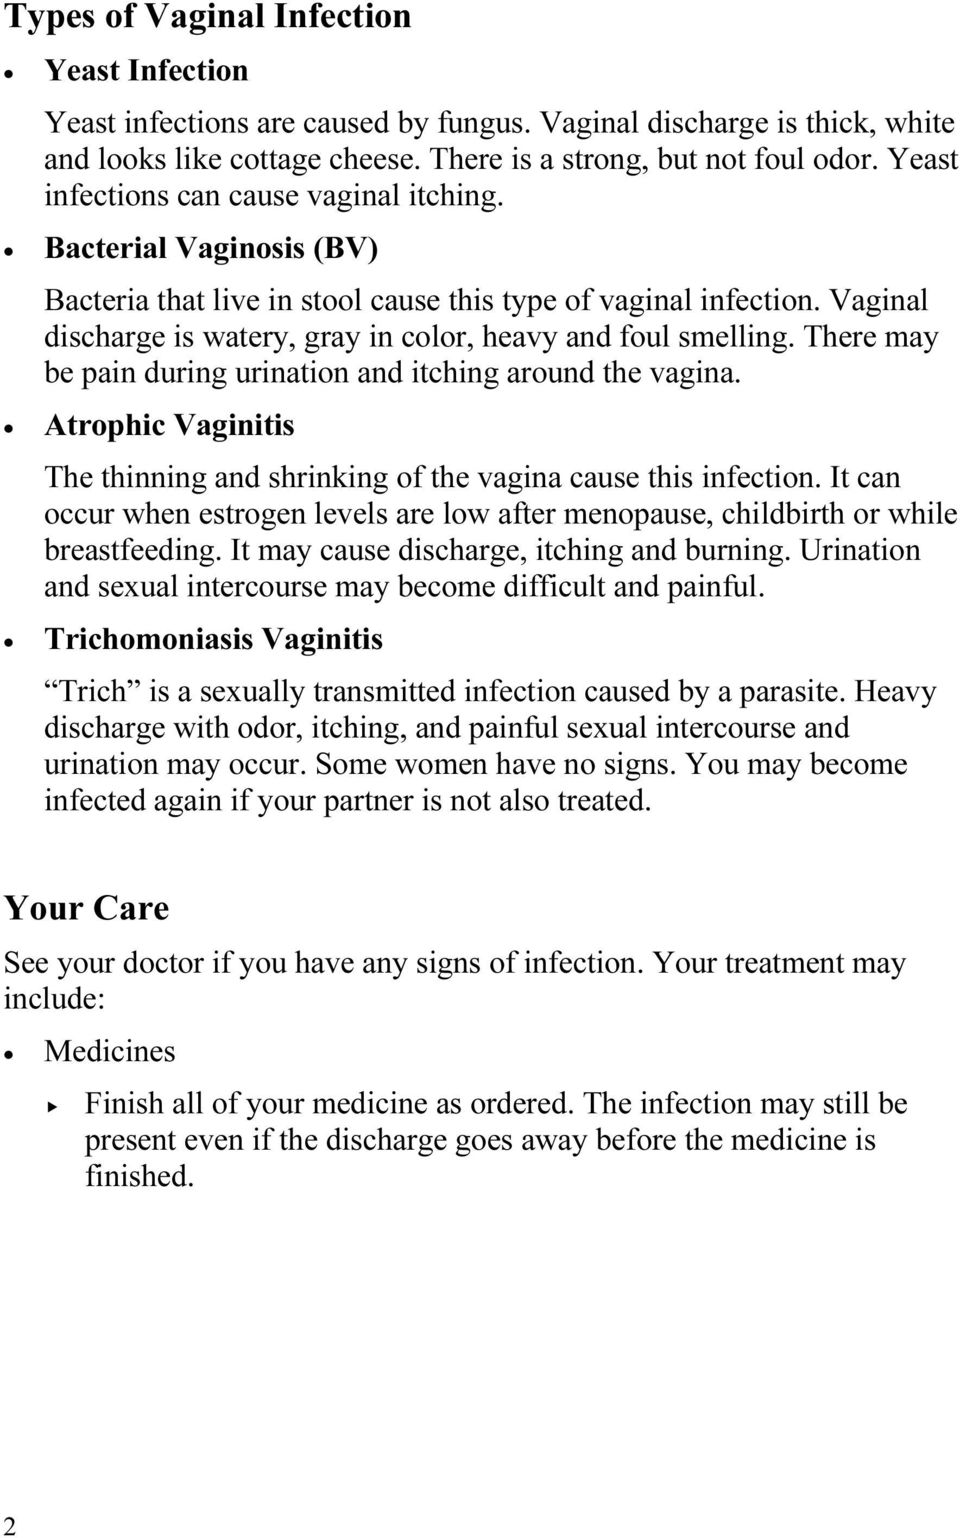 Vaginal discharge is watery, gray in color, heavy and foul smelling. There may be pain during urination and itching around the vagina.